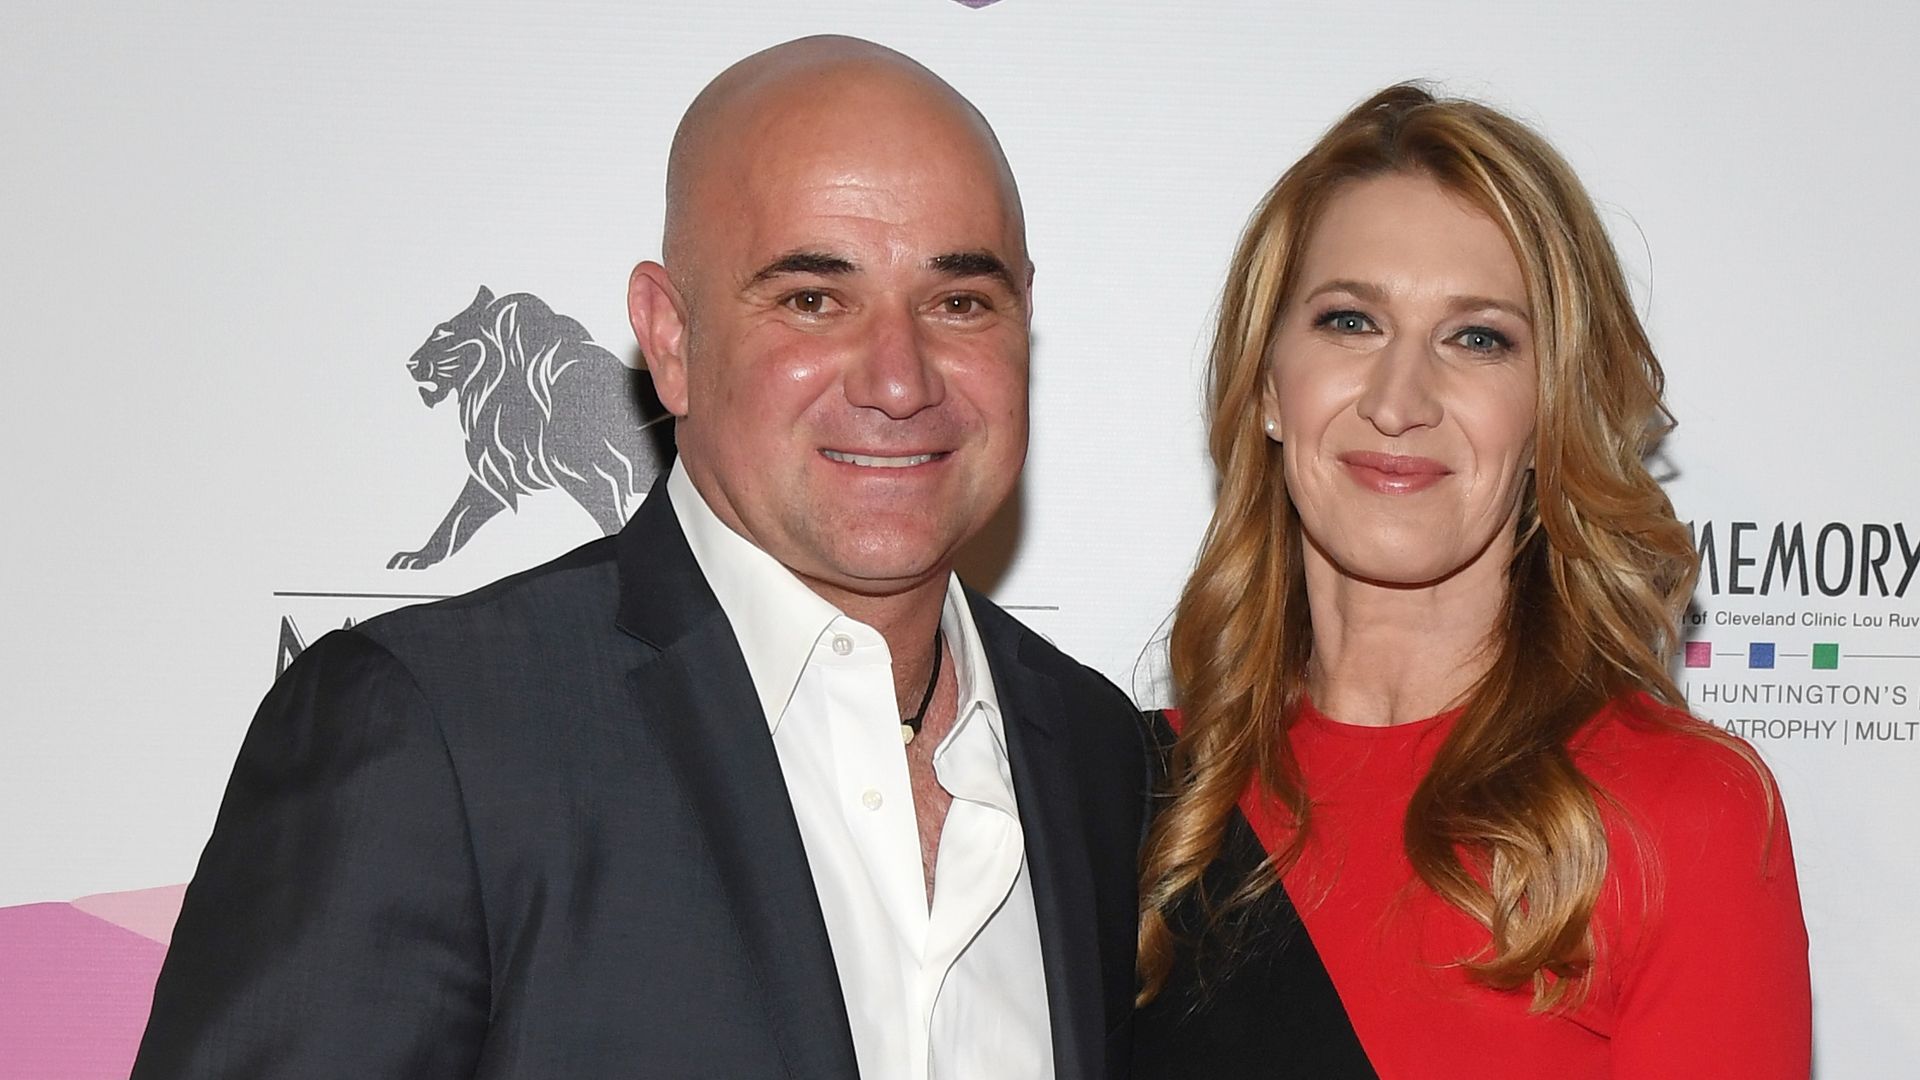 Andre Agassi shares picture of his 'baby' Steffi Graf during heartwarming moment